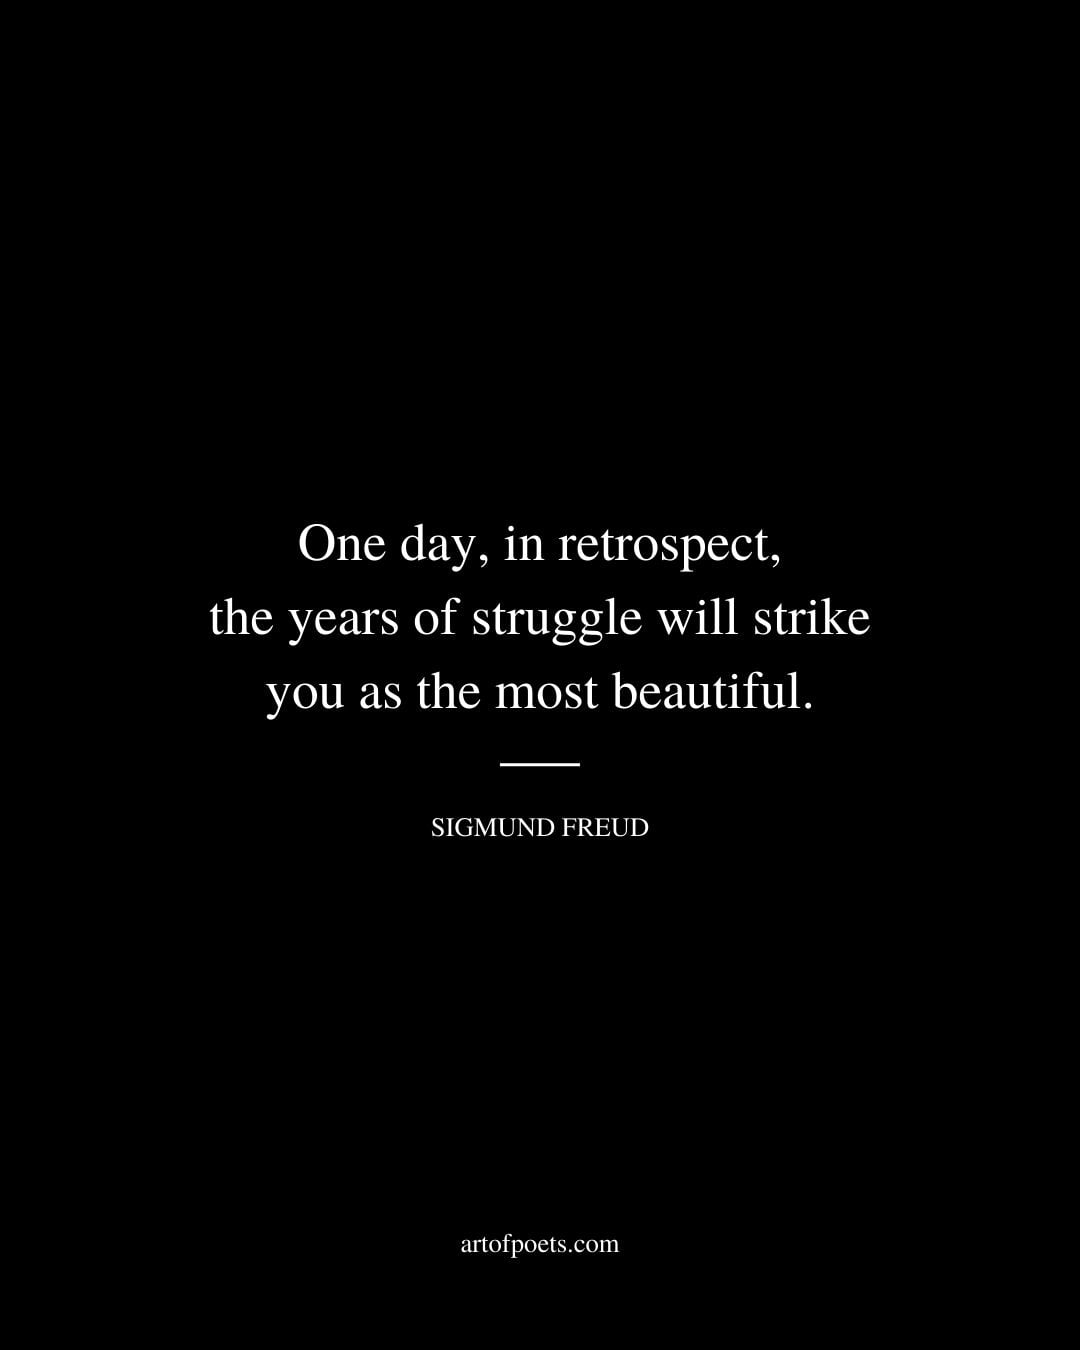 One day in retrospect the years of struggle will strike you as the most beautiful